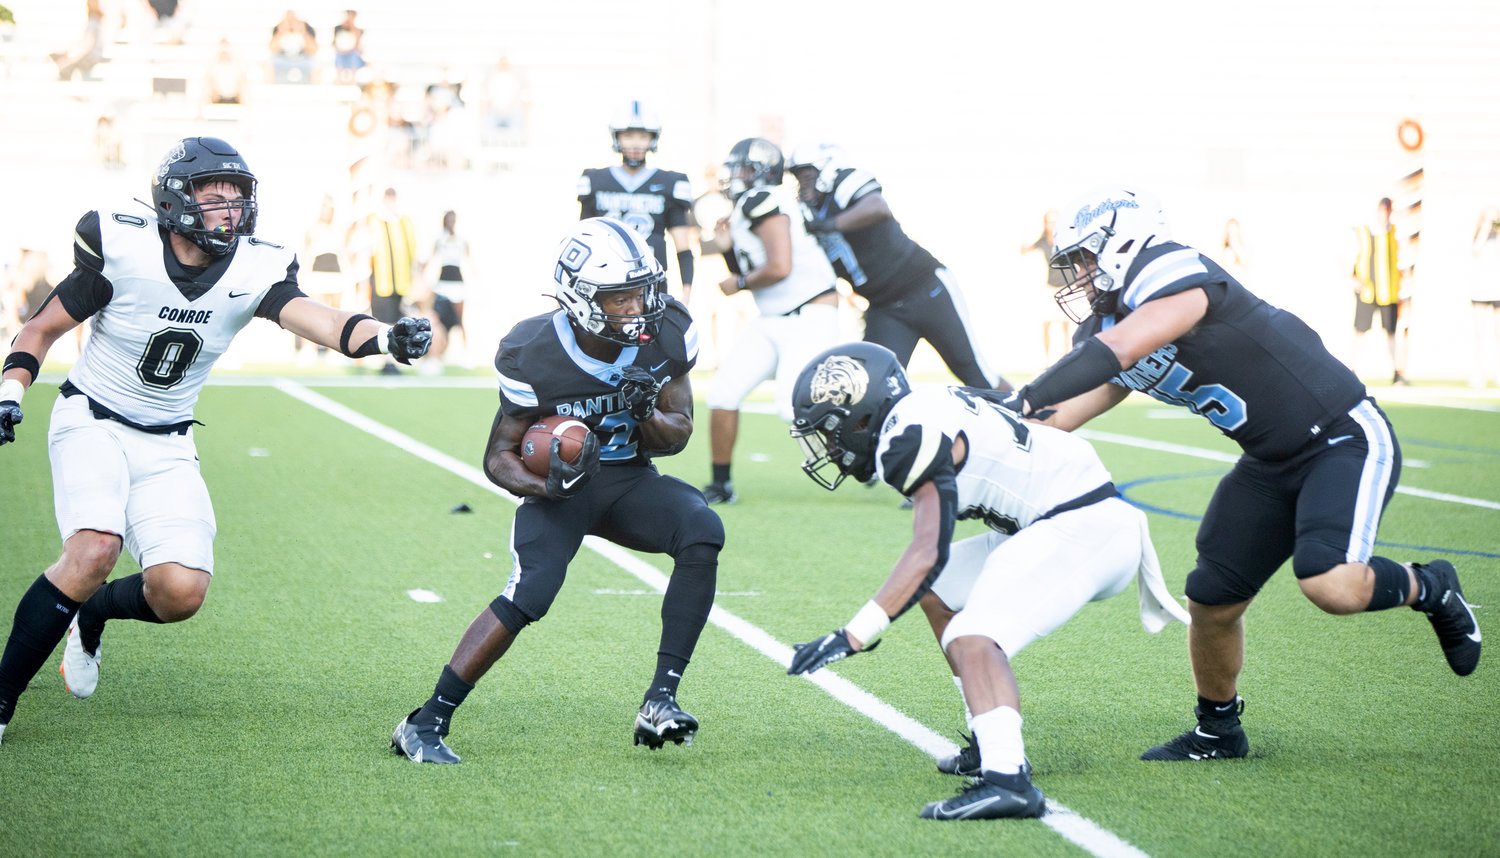 Paetow’s Derrick Johnson evades a defender during Friday’s game against Conroe at Legacy Stadium.